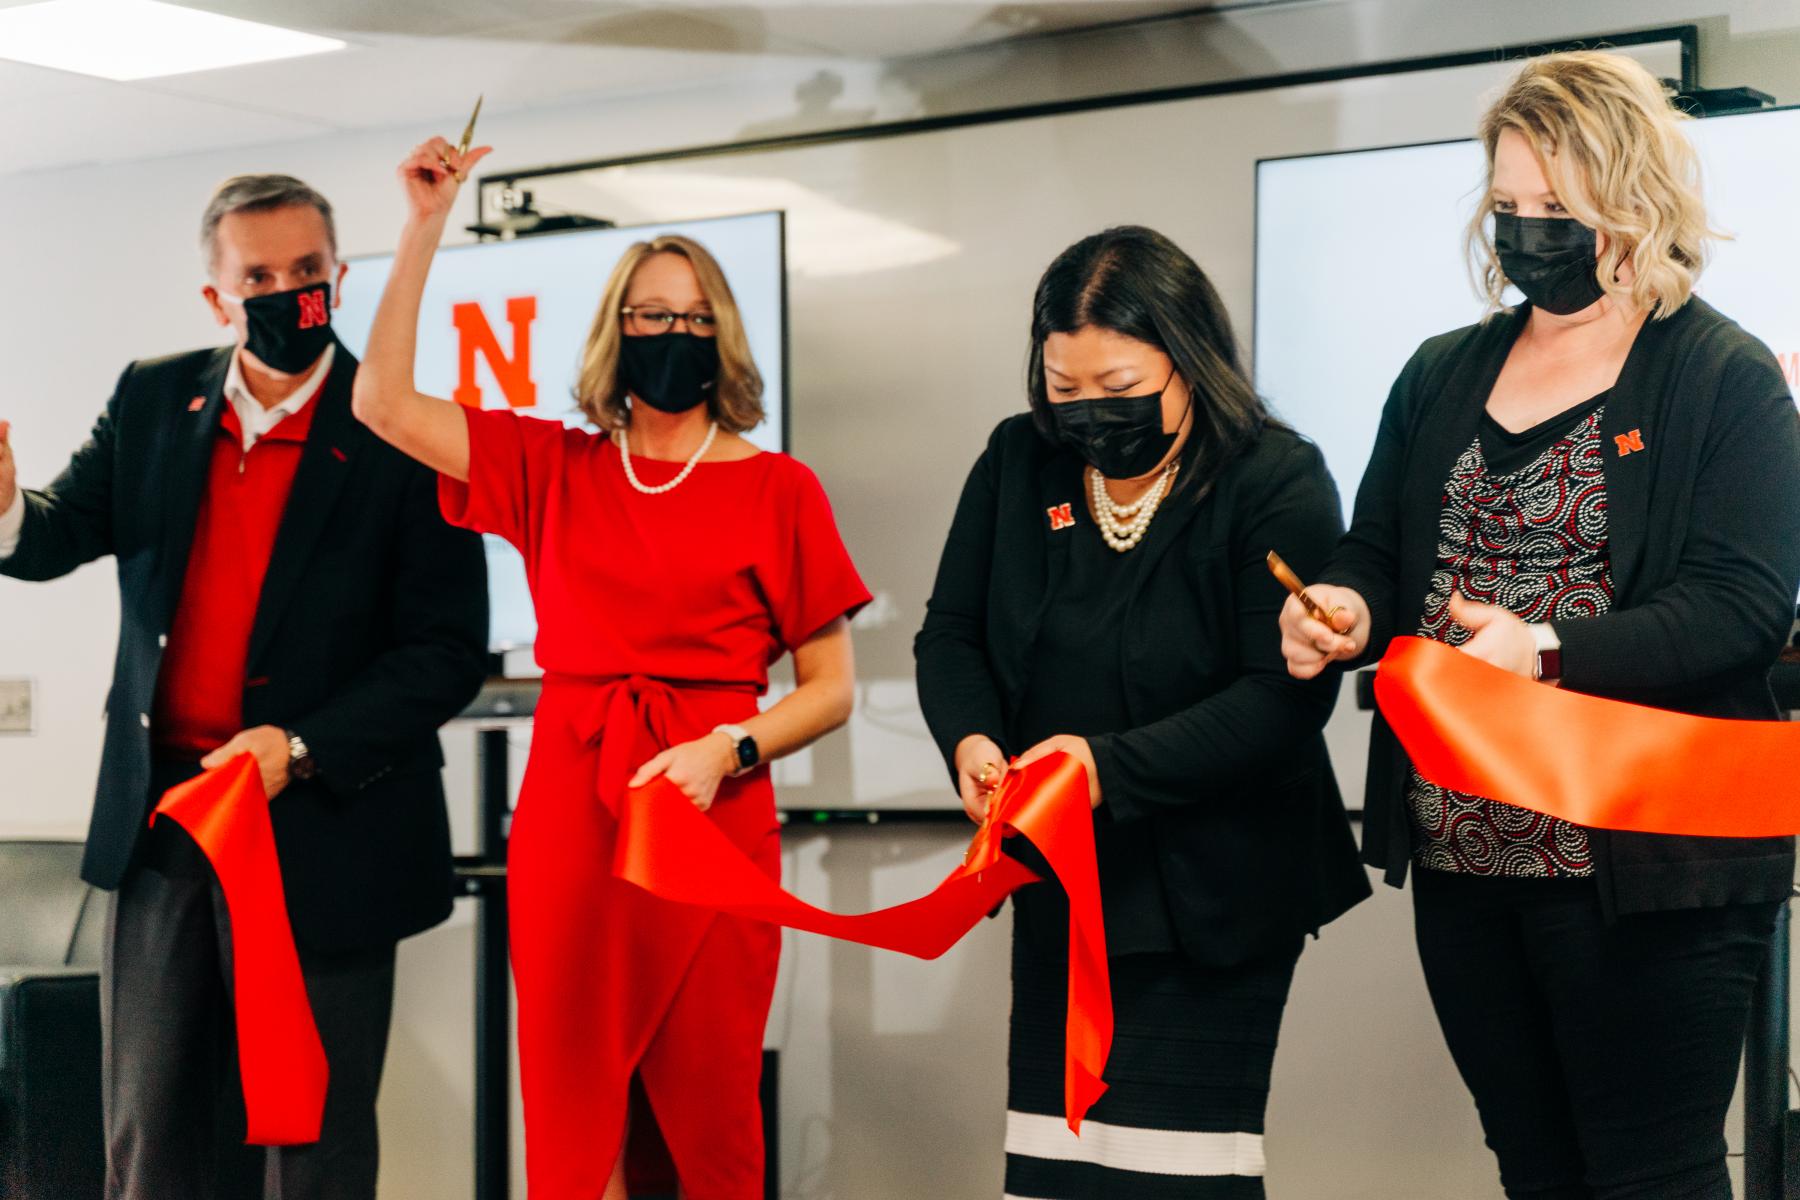 Four people cutting a ribbon.